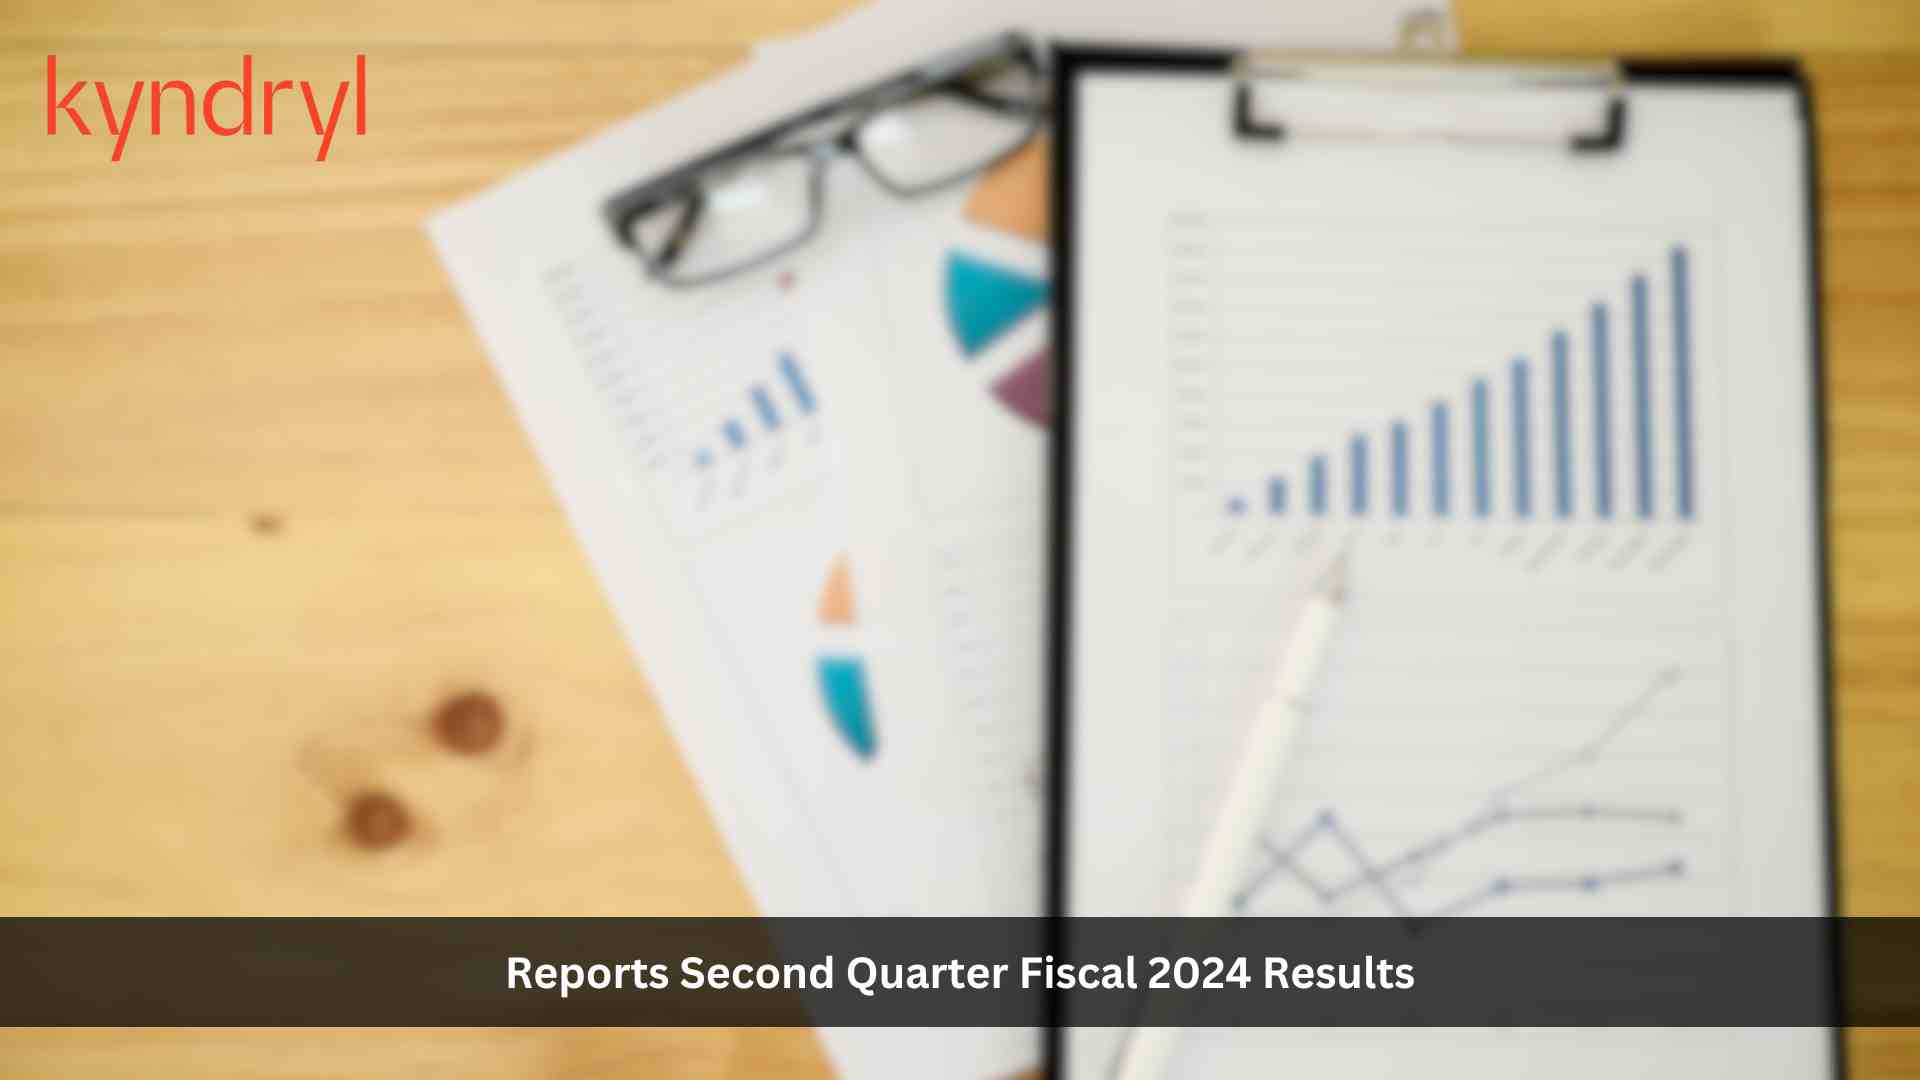 KYNDRYL REPORTS SECOND QUARTER FISCAL 2024 RESULTS AND RAISES ITS FULL